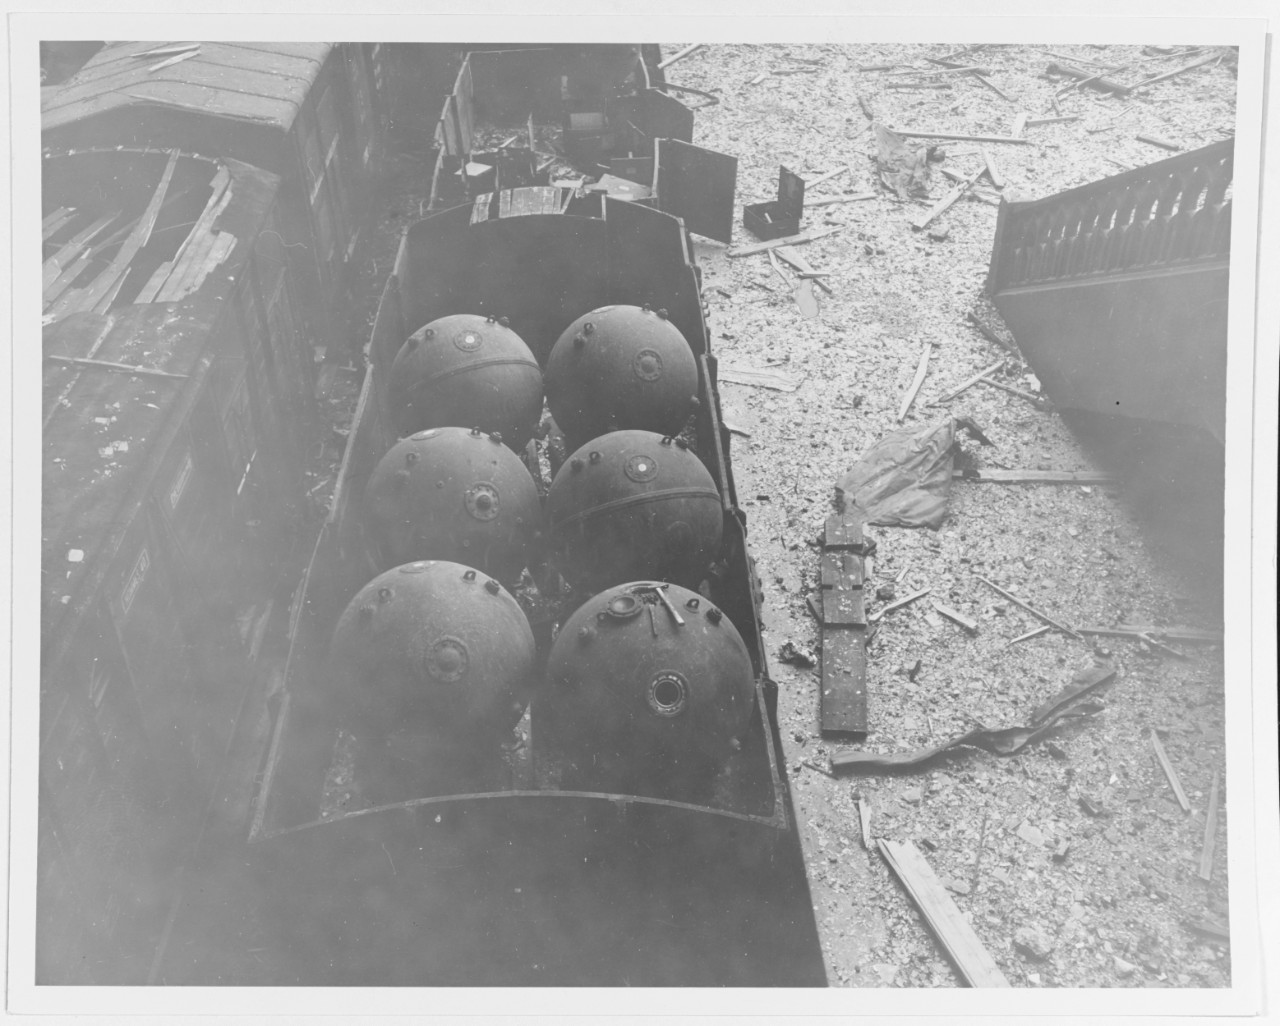 Photo #: 80-G-254312  Cherbourg Campaign, June 1944